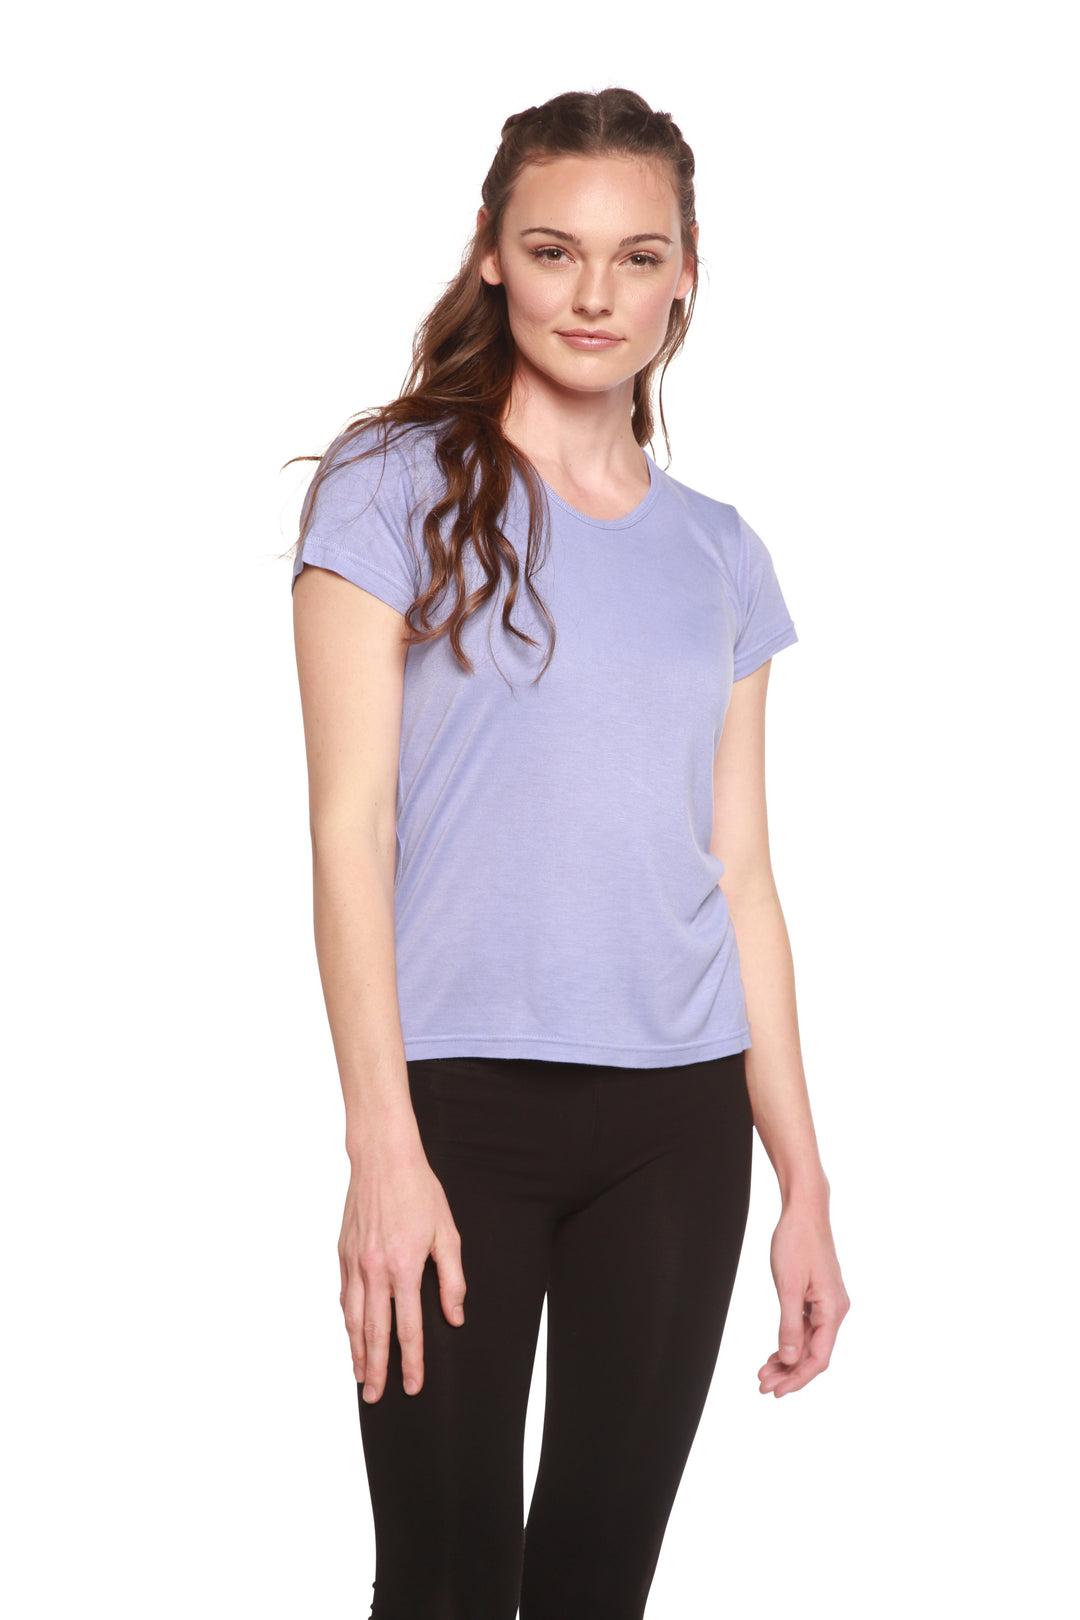 Women´s short sleeve thermal t-shirt in 100% cotton.